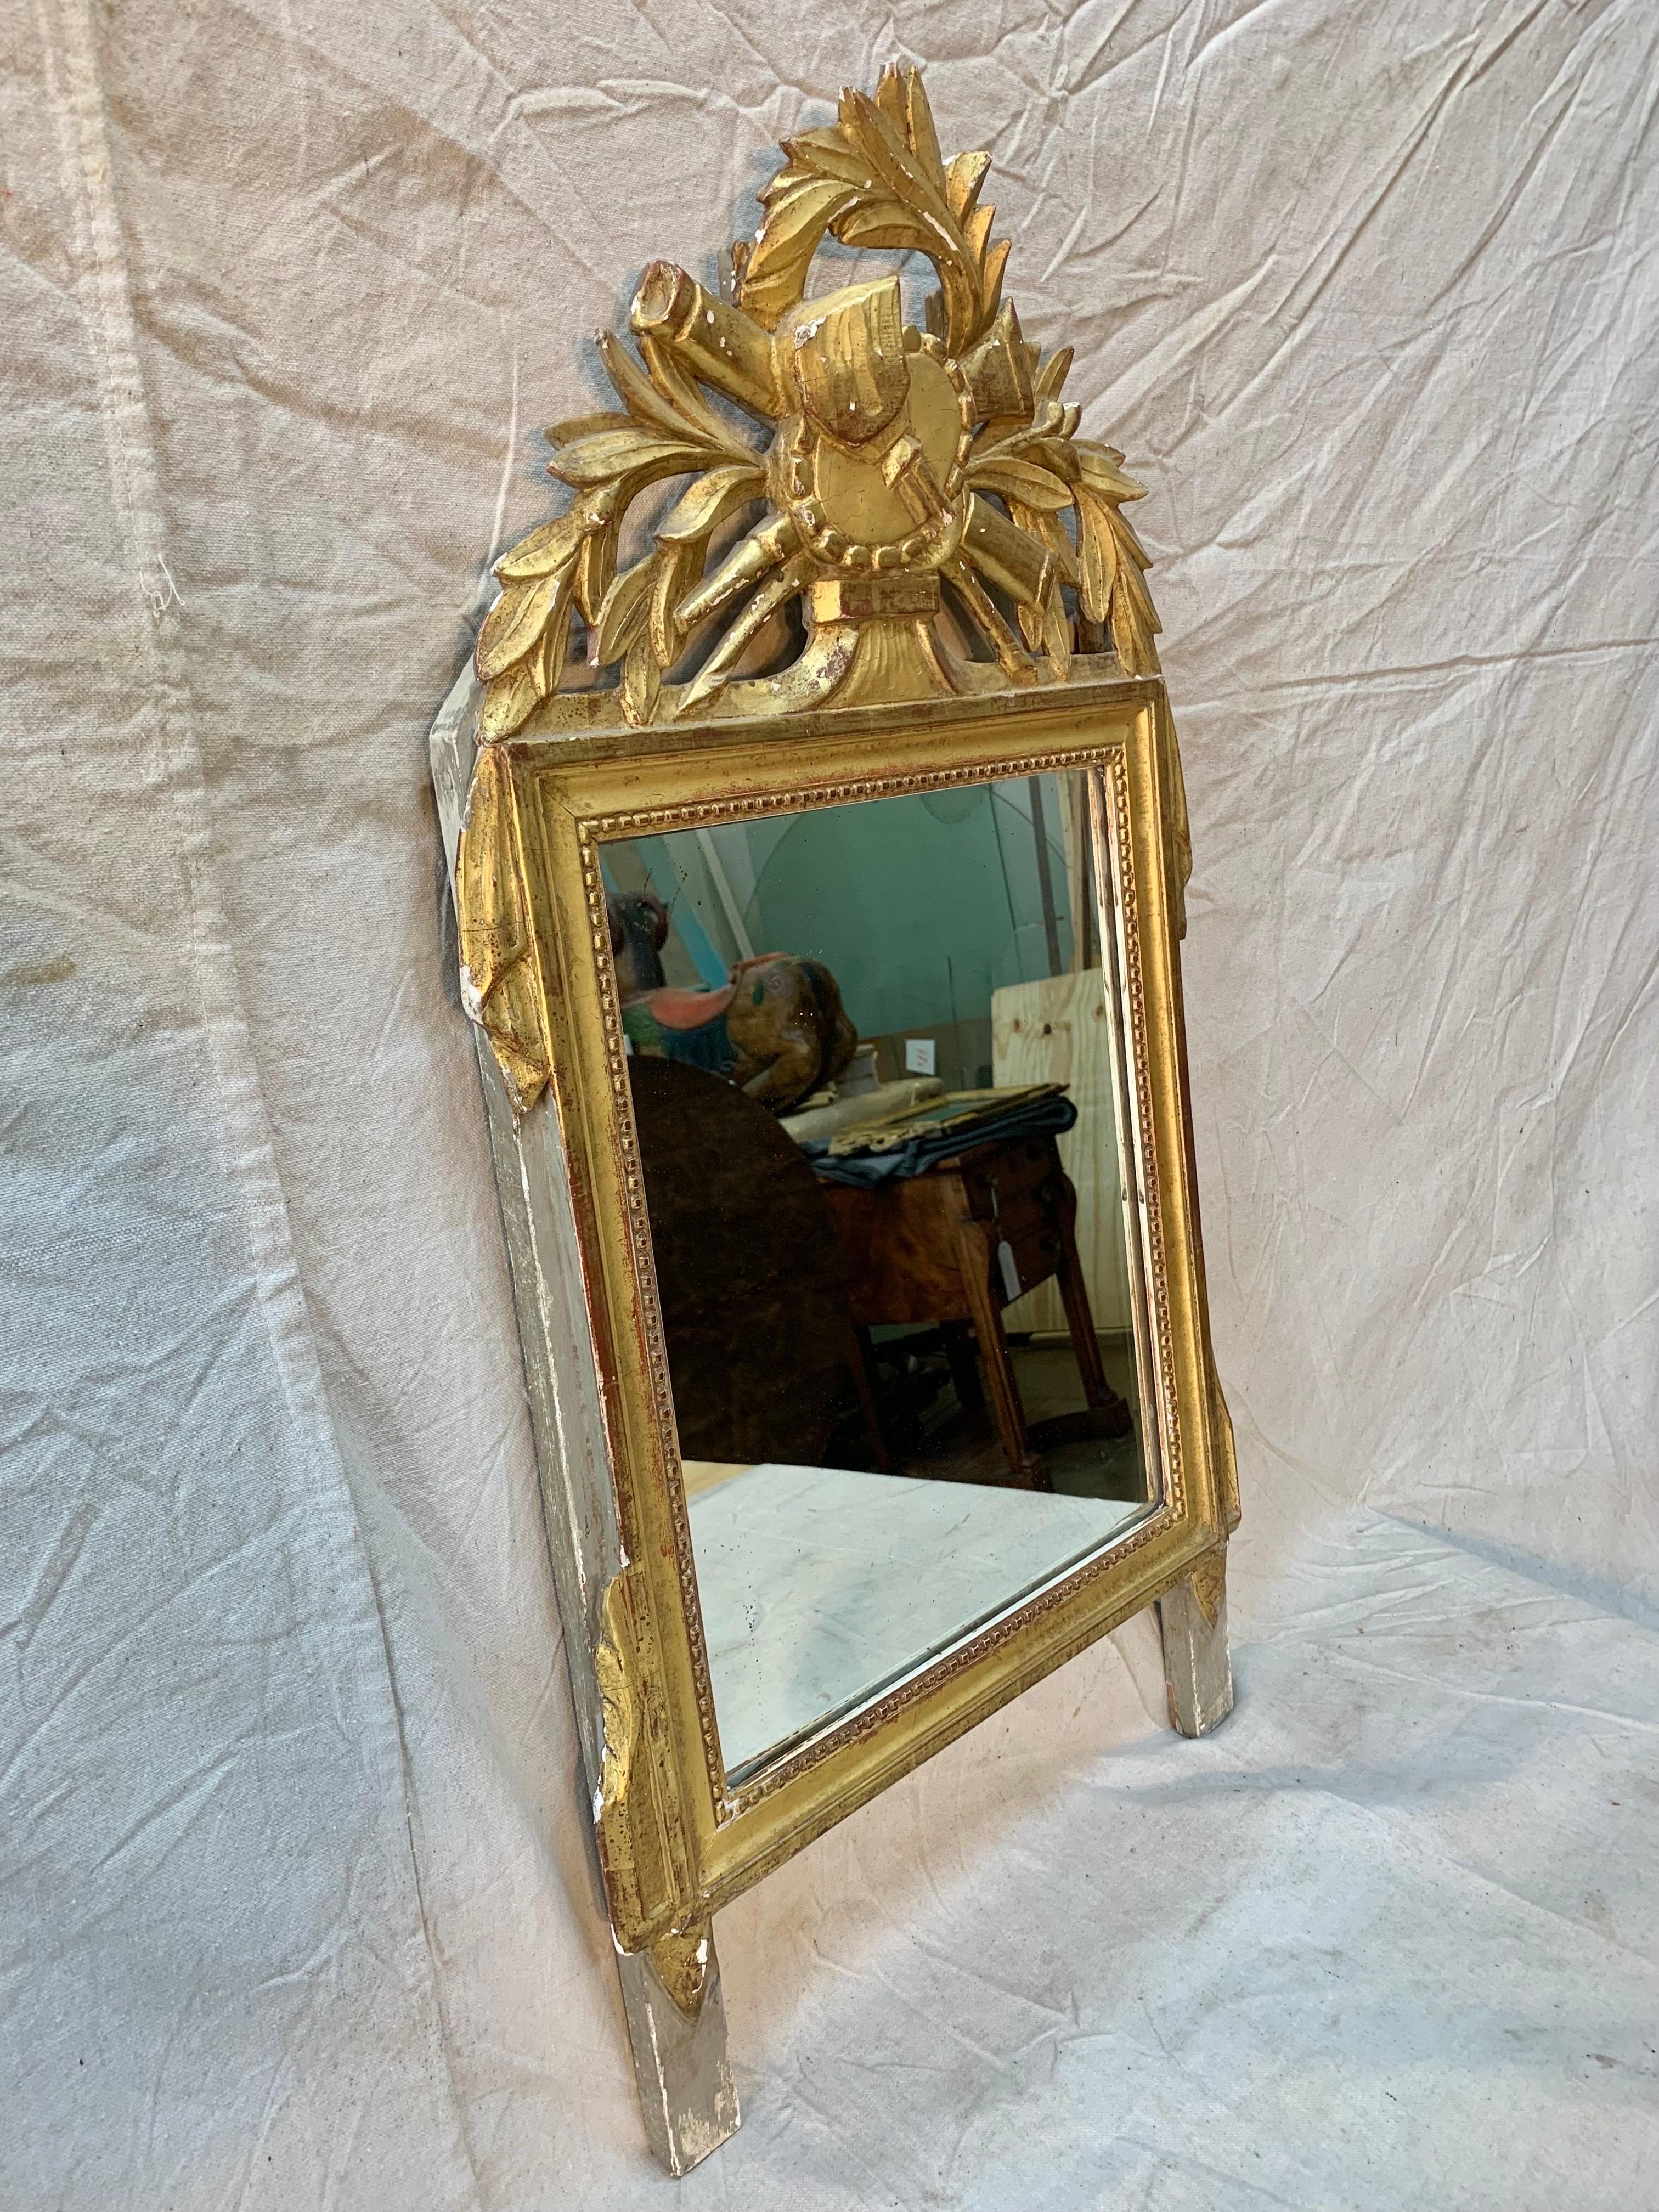 Presented as found, this beautiful Mid 19th Century Carved and Gilded French Wall Mirror features a decorative motif and details of foliage. The mirrored glass has some spotting and crazing which adds to the patina of the piece. Newly wired and